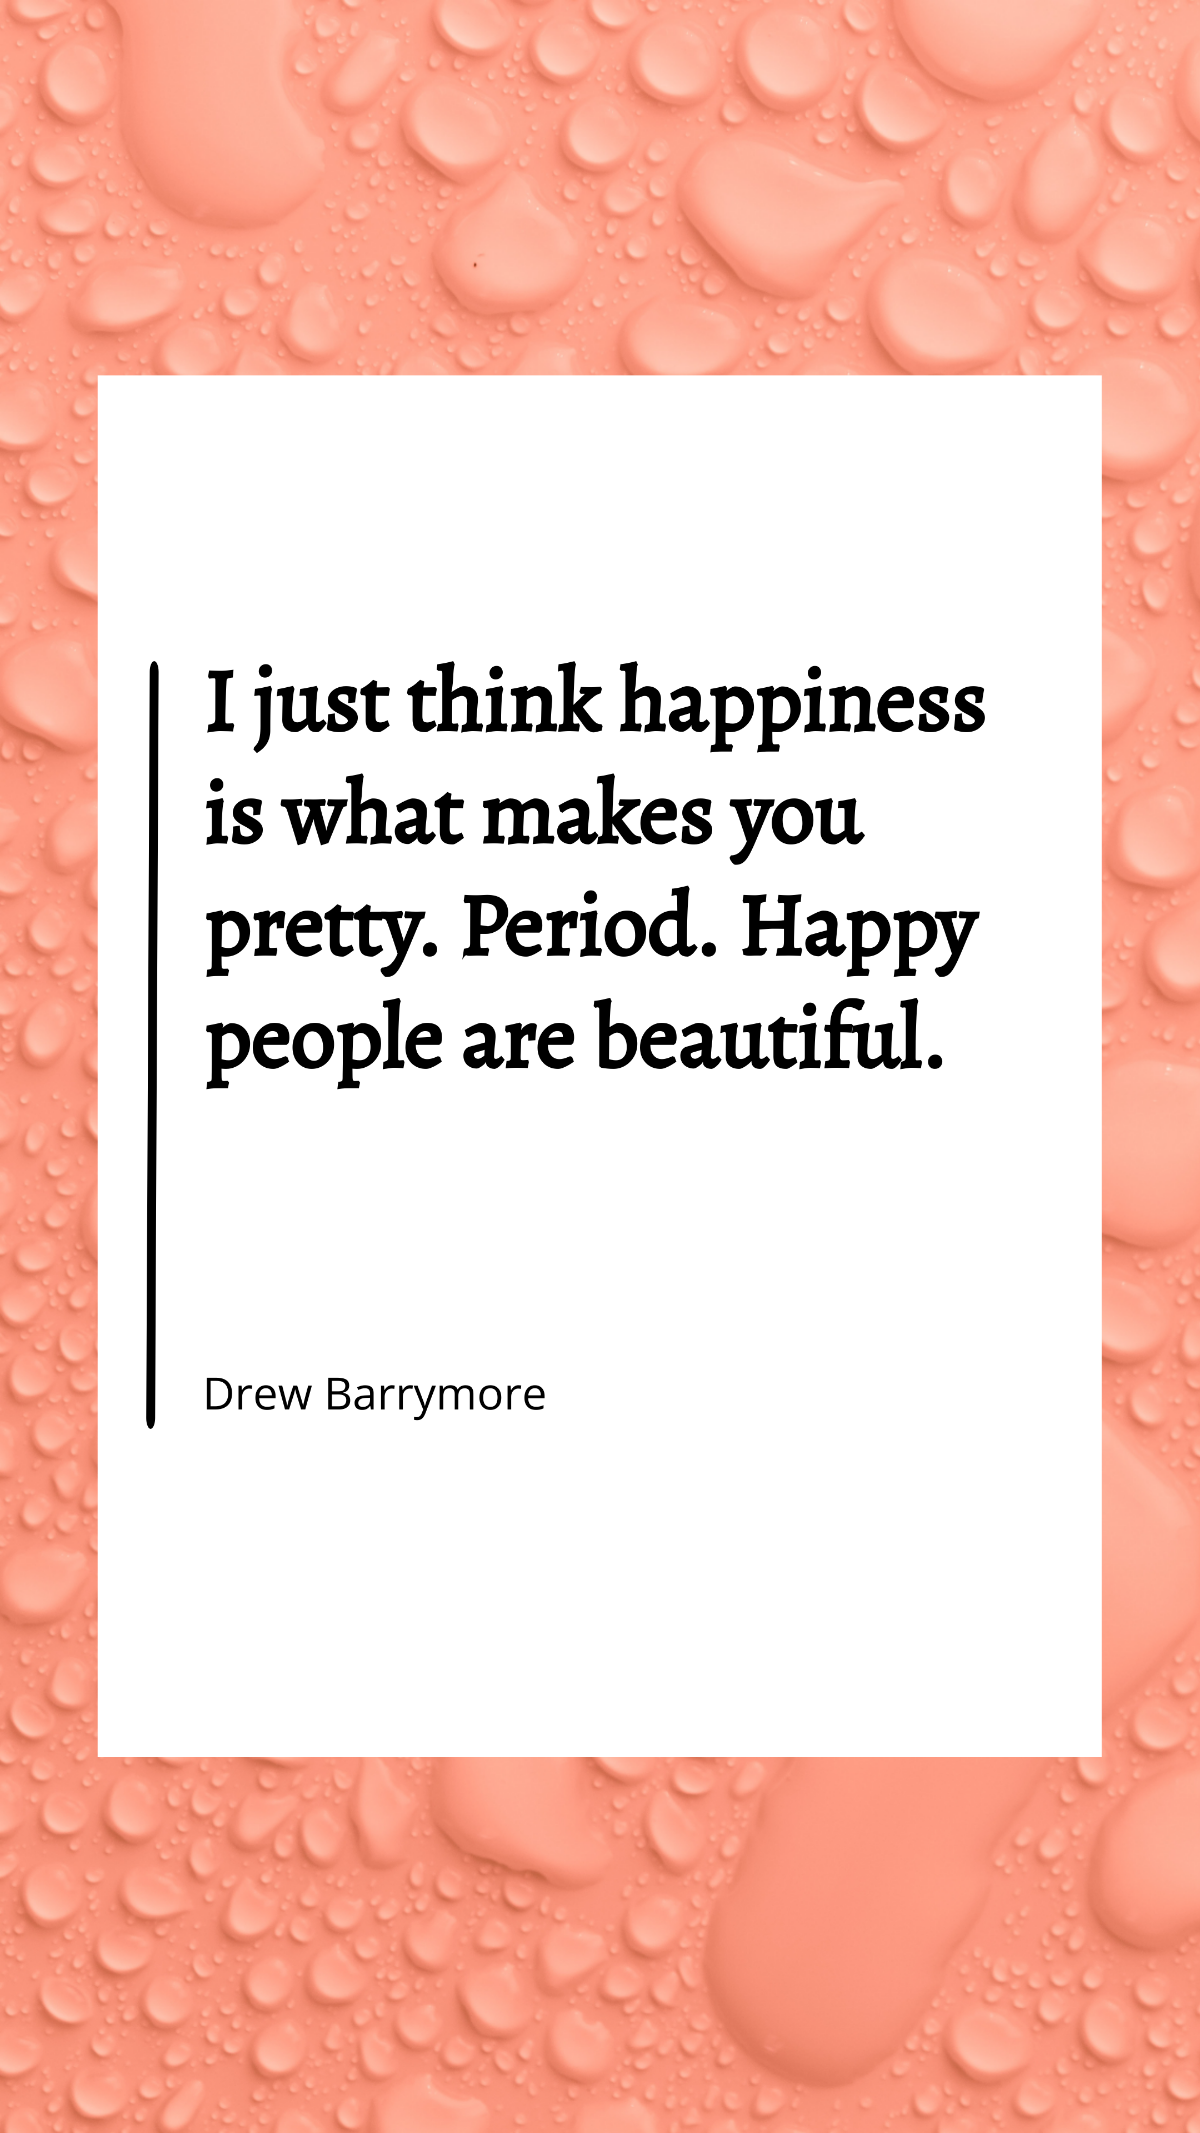 Drew Barrymore - I just think happiness is what makes you pretty. Period. Happy people are beautiful. Template